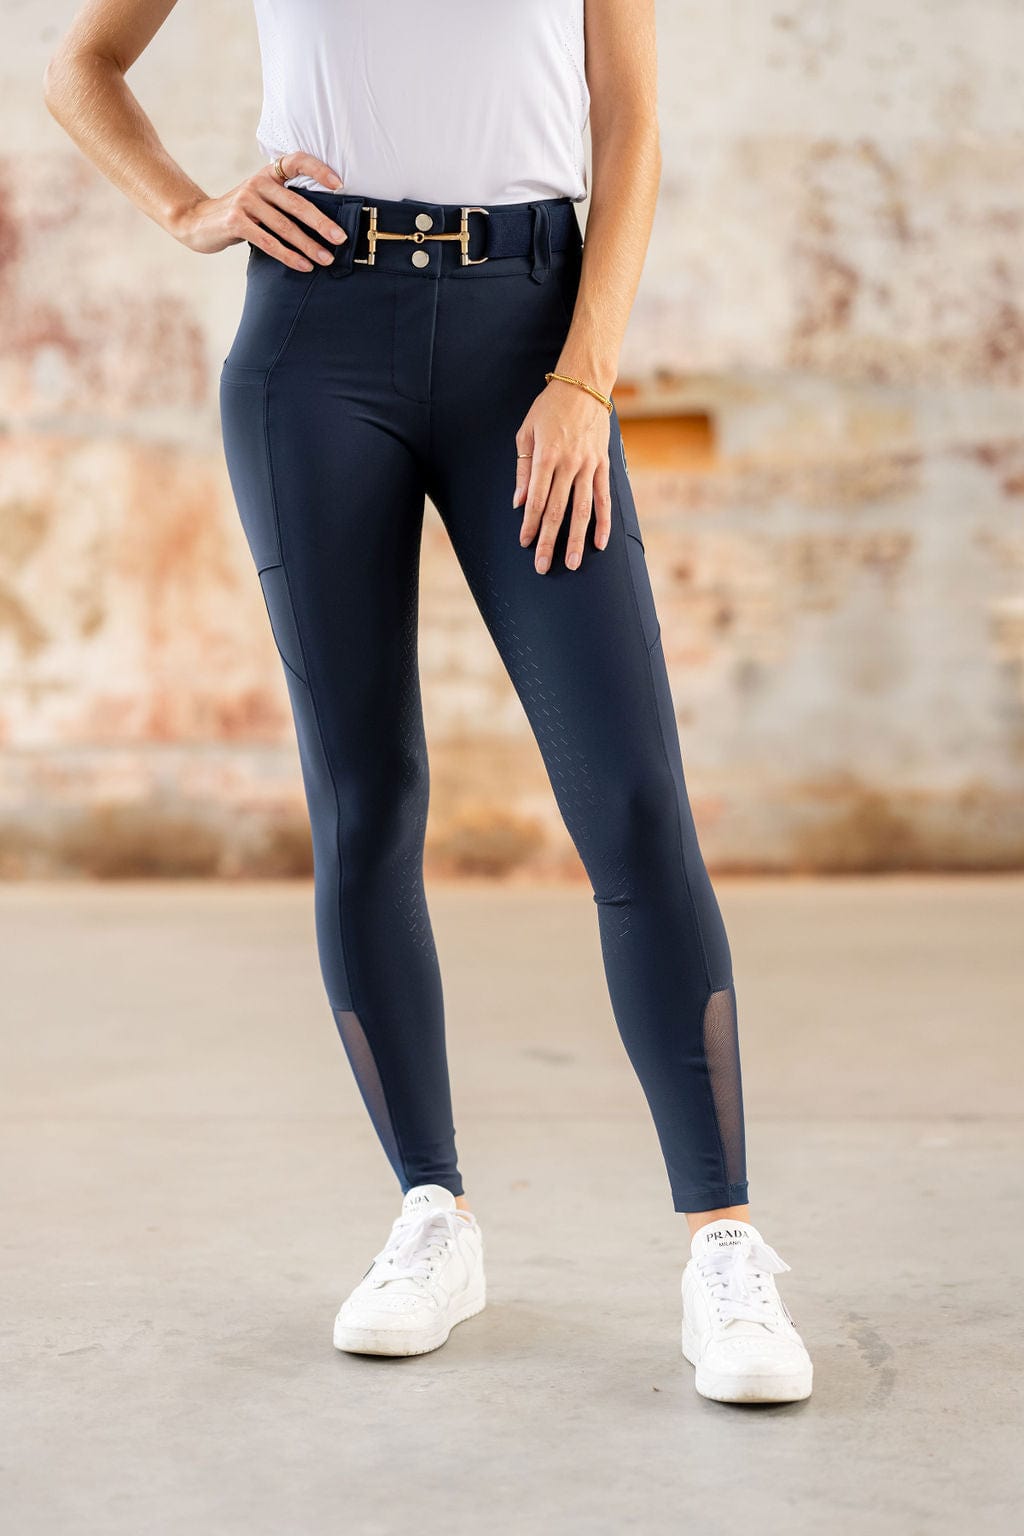 Equestrian riding leggings and breeches with built-in underwear